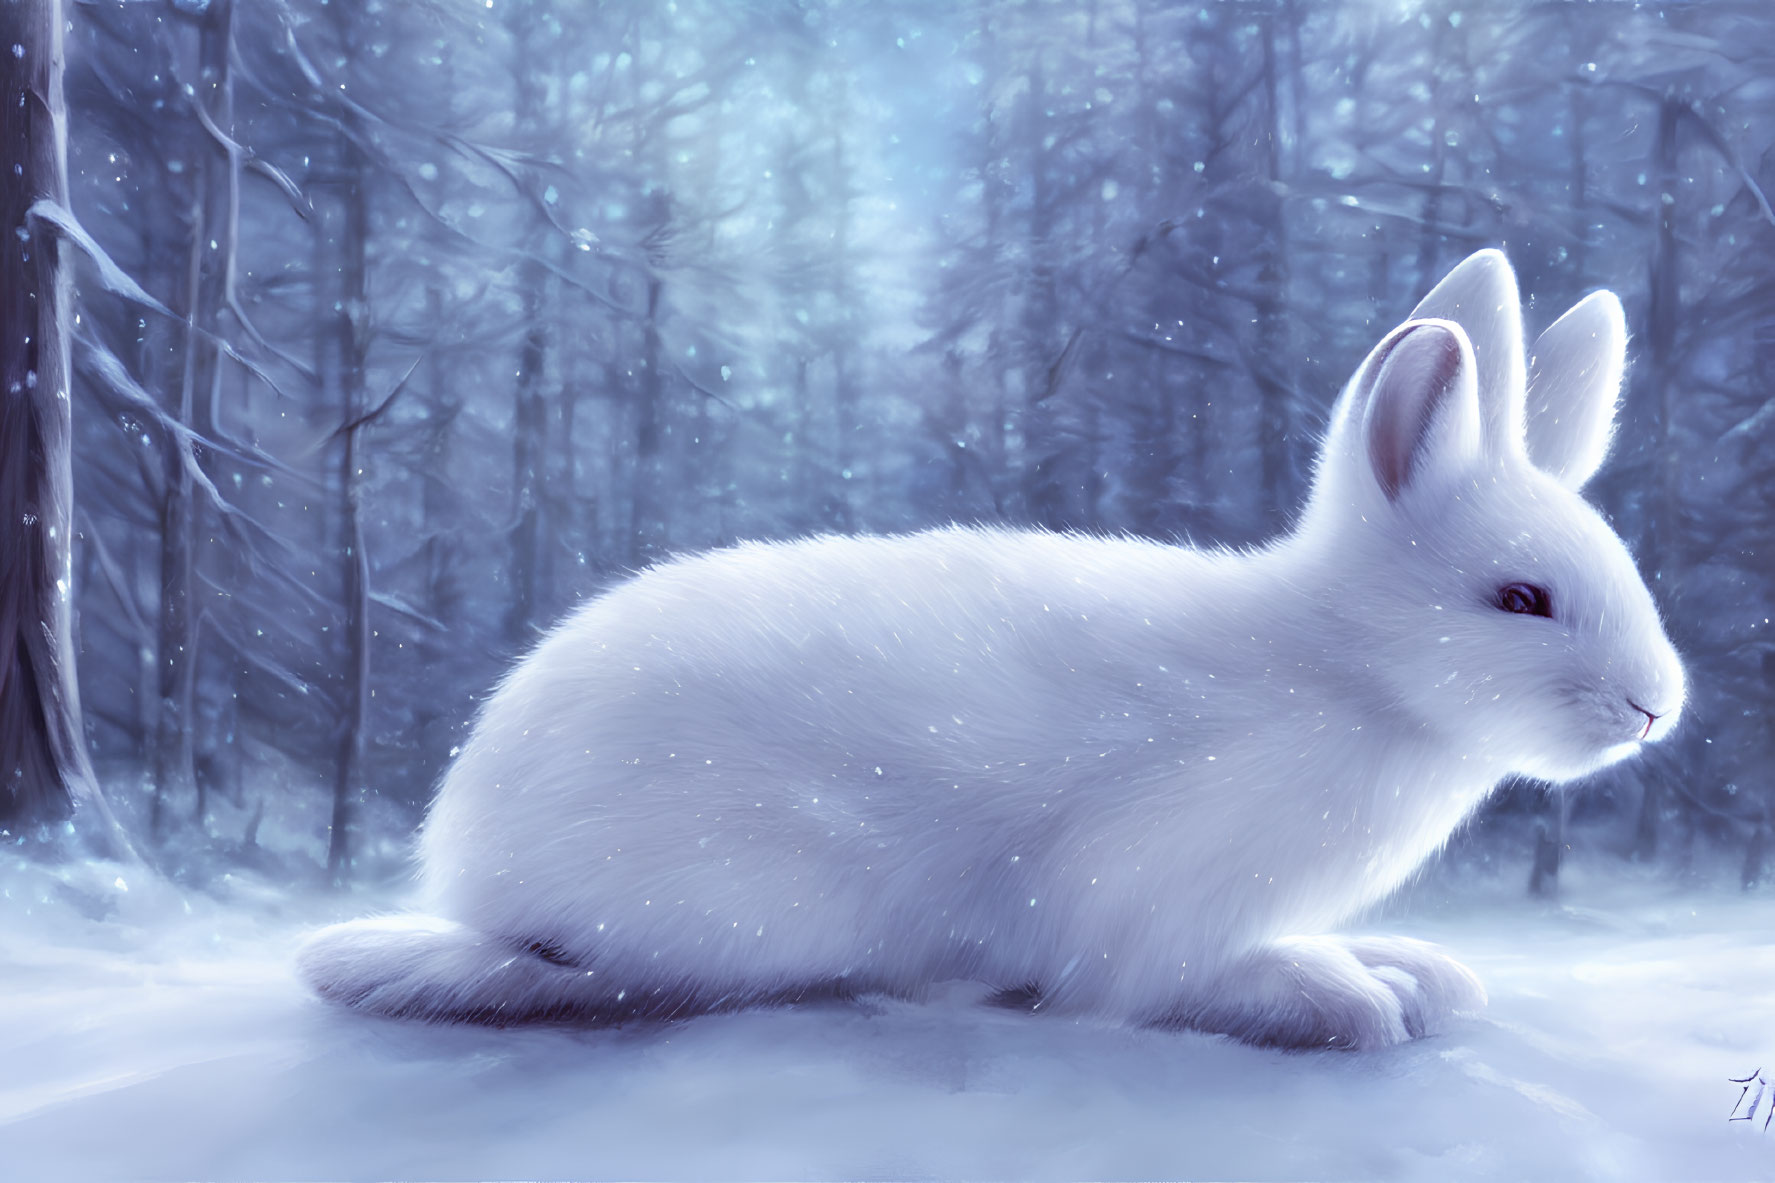 White Rabbit in Snowy Forest Scene with Falling Snowflakes